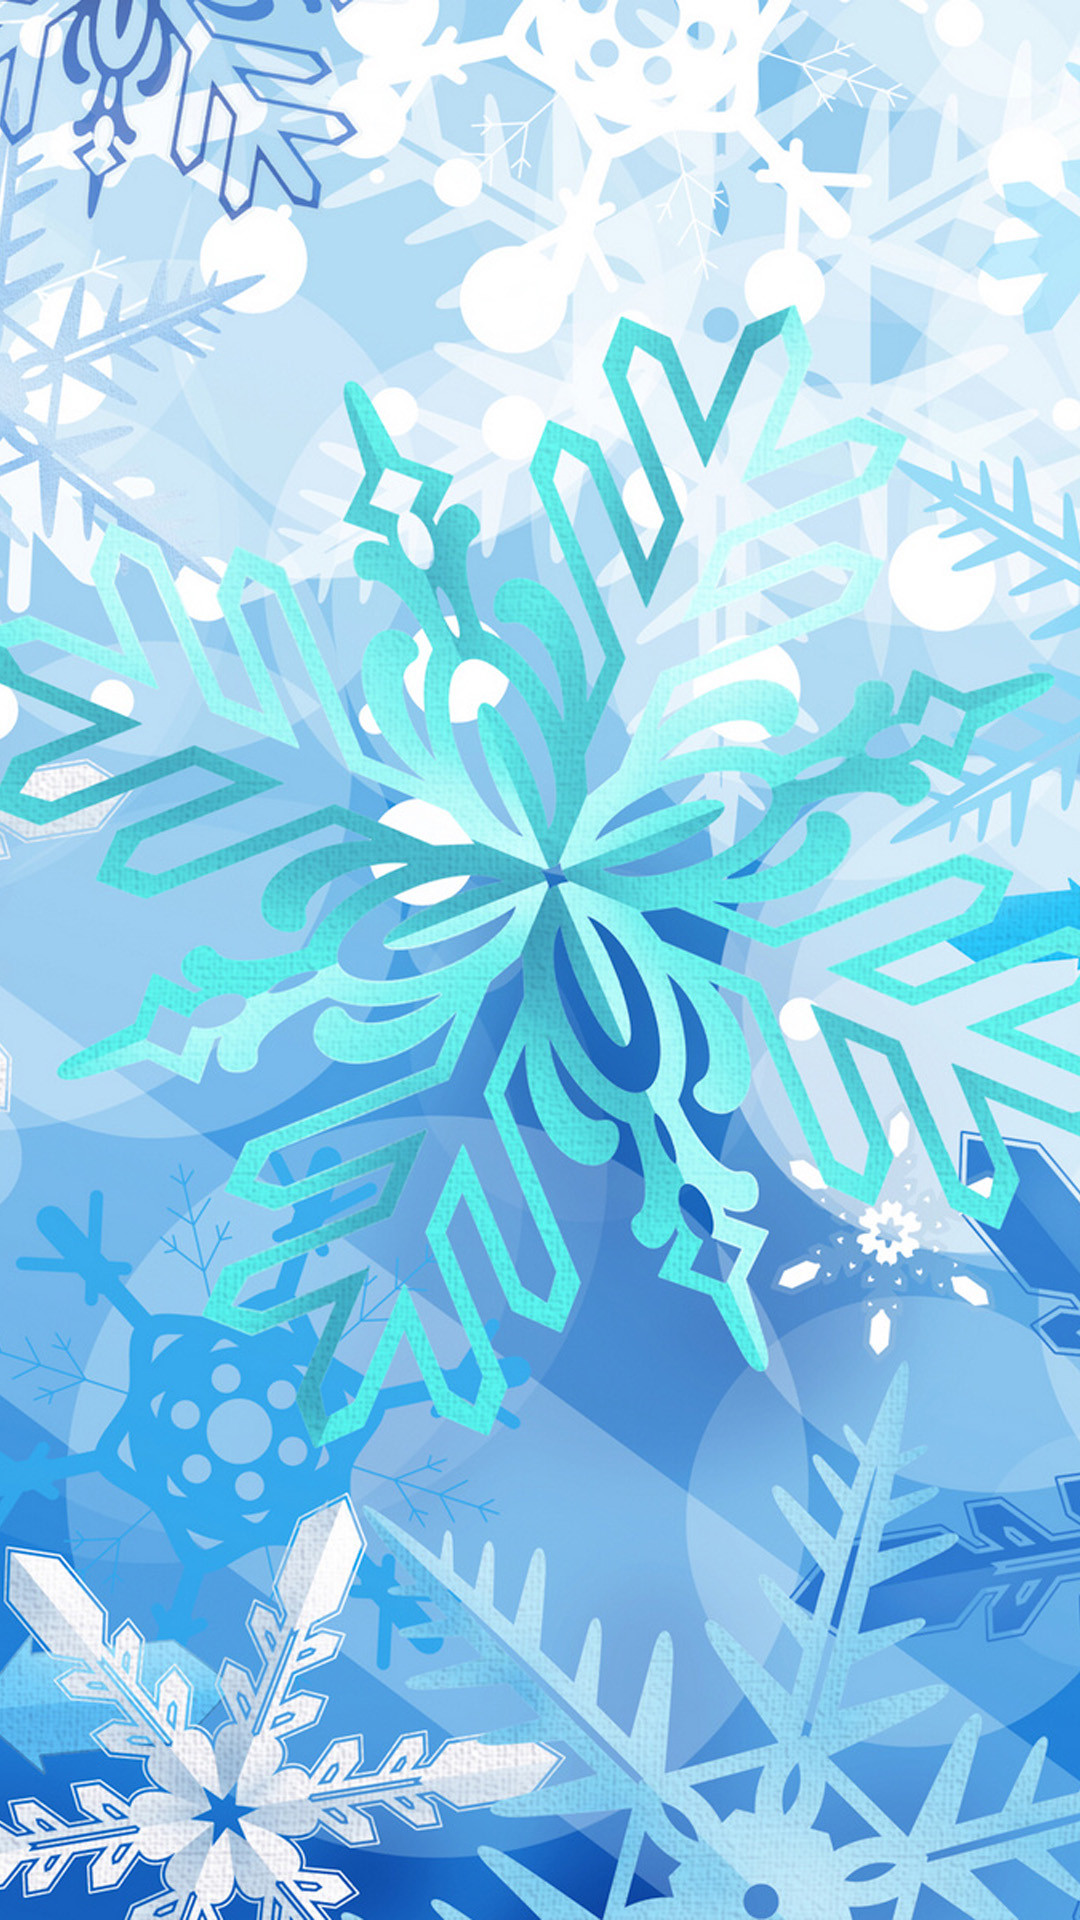 1080x1920 Art Snow Texture Pattern Blue Cold Awesome. Iphone 6 WallpaperIphone ...